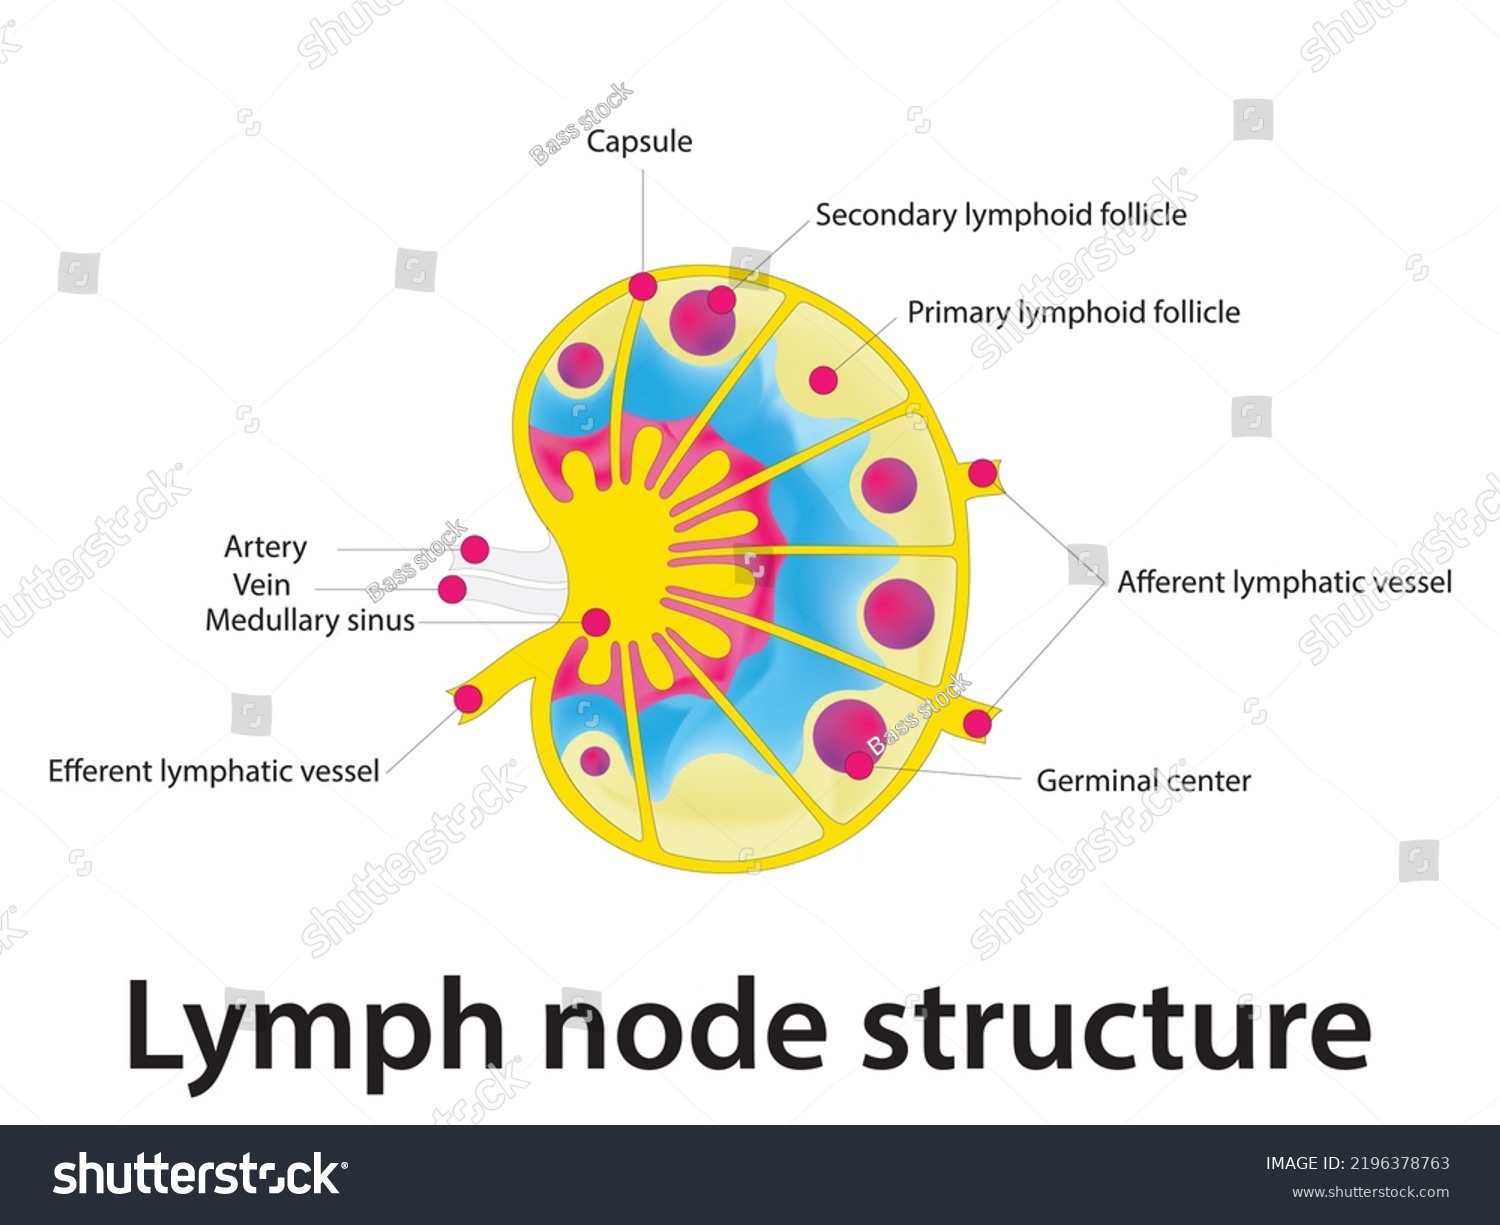 Lymph Node Structure Schematic Anatomic Illustration Stock Vector Royalty Free 2196378763